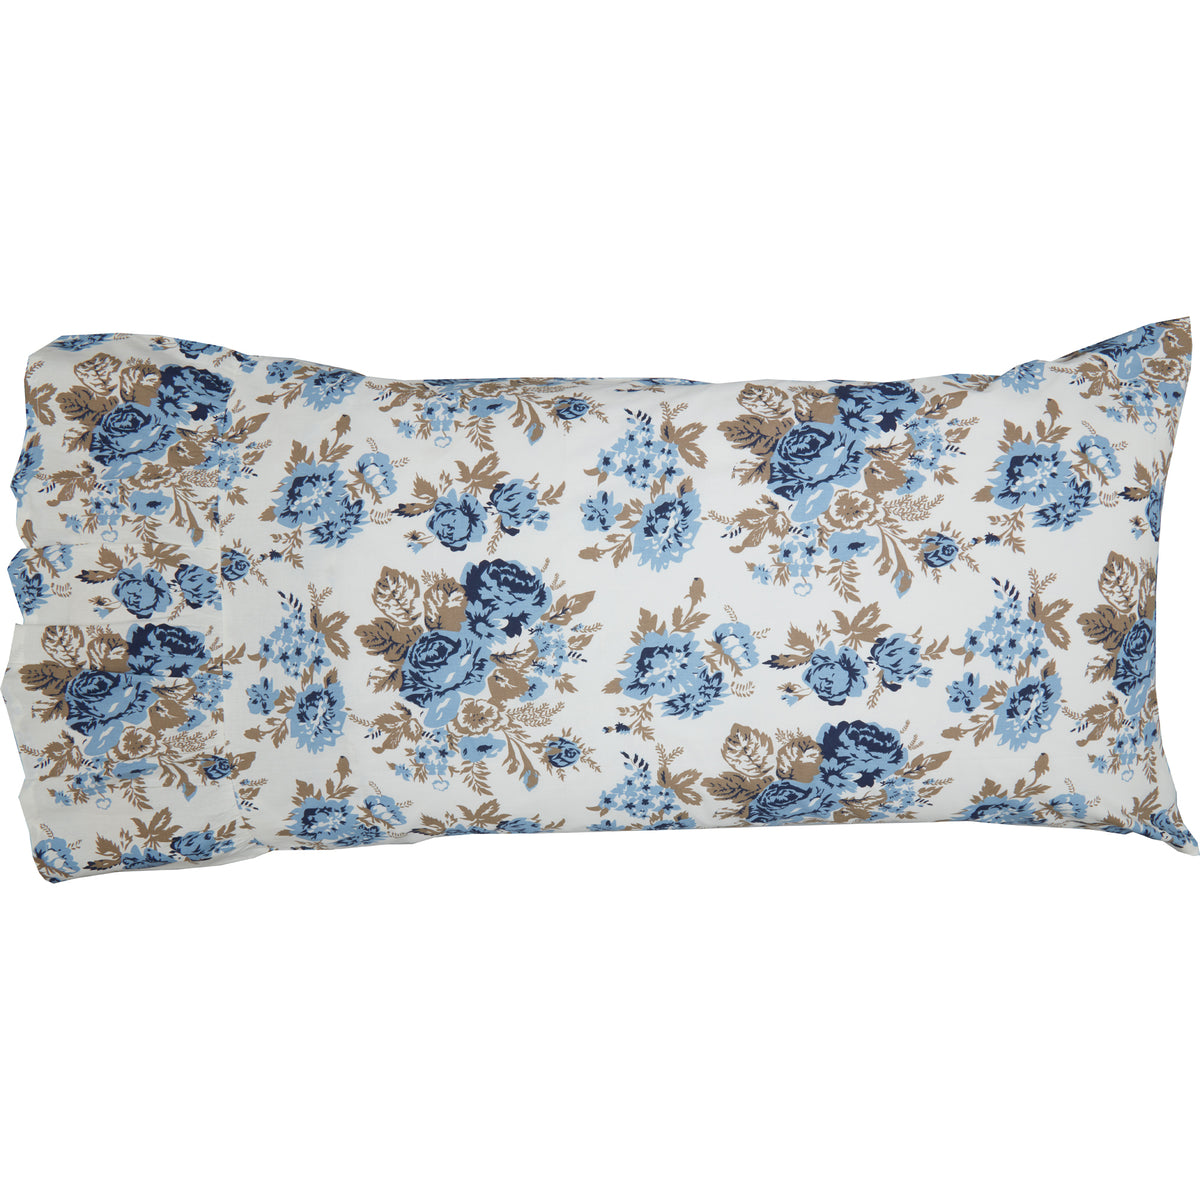 Annie Blue Floral Ruffled King Pillow Case Set of 2 21x36+8